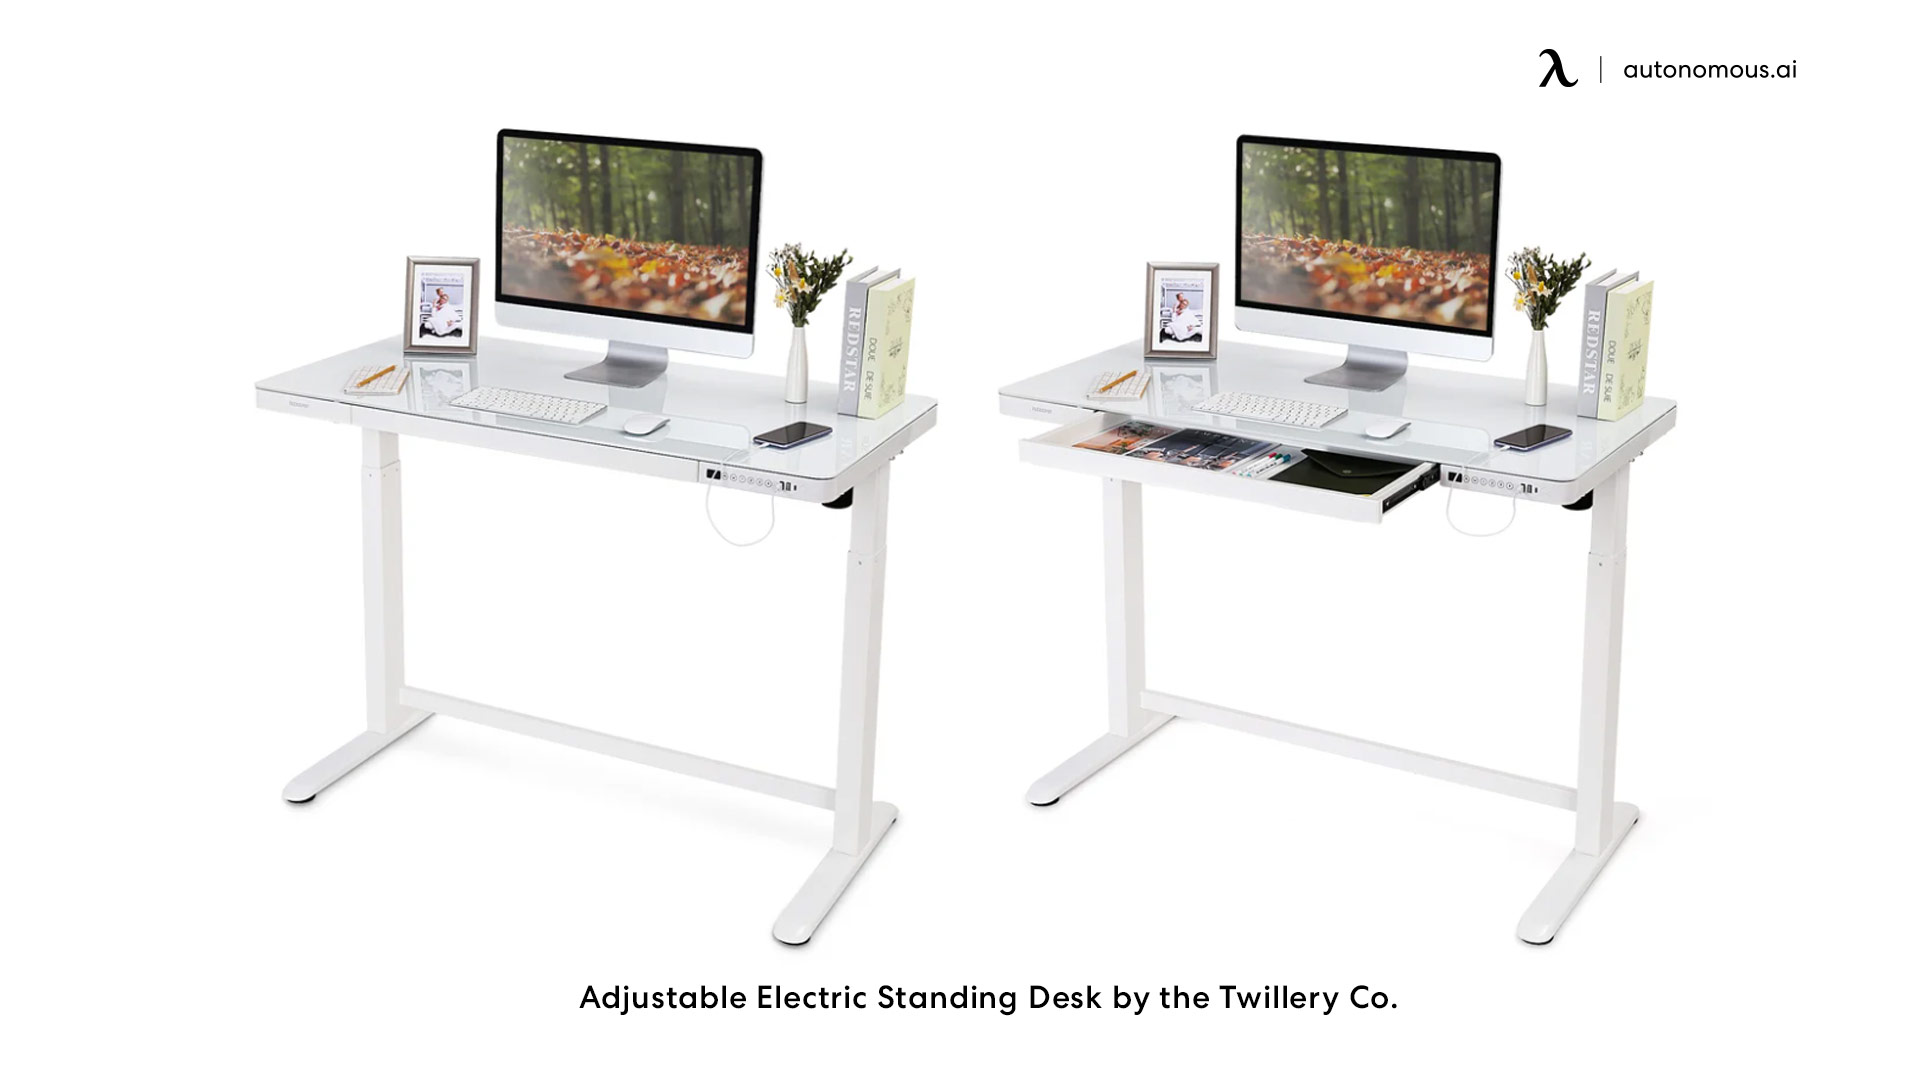 Adjustable Electric Standing Desk by the Twillery Co.